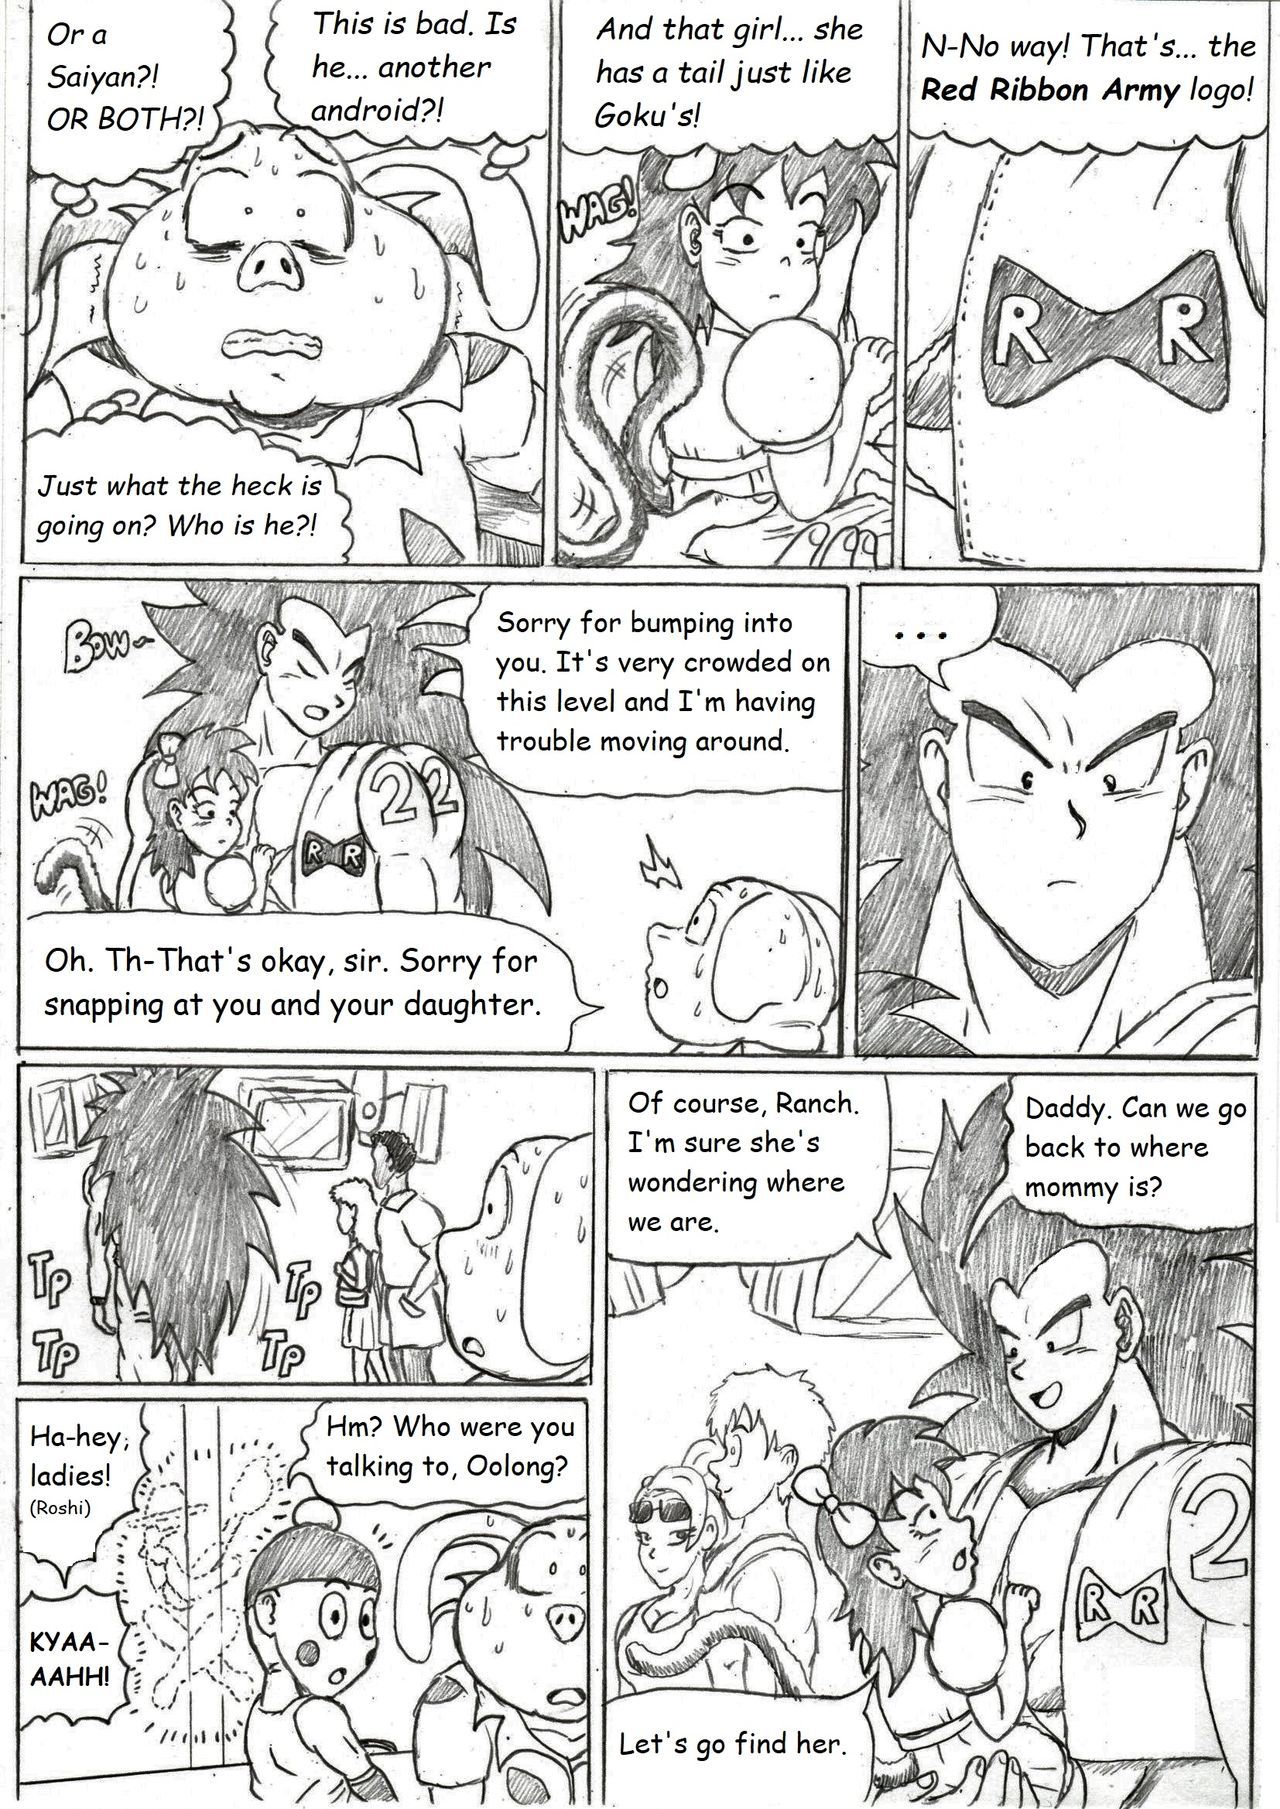 [TheWriteFiction] Dragonball Z Golden Age - Chapter 3 - The Strange Tournament (Ongoing) 21